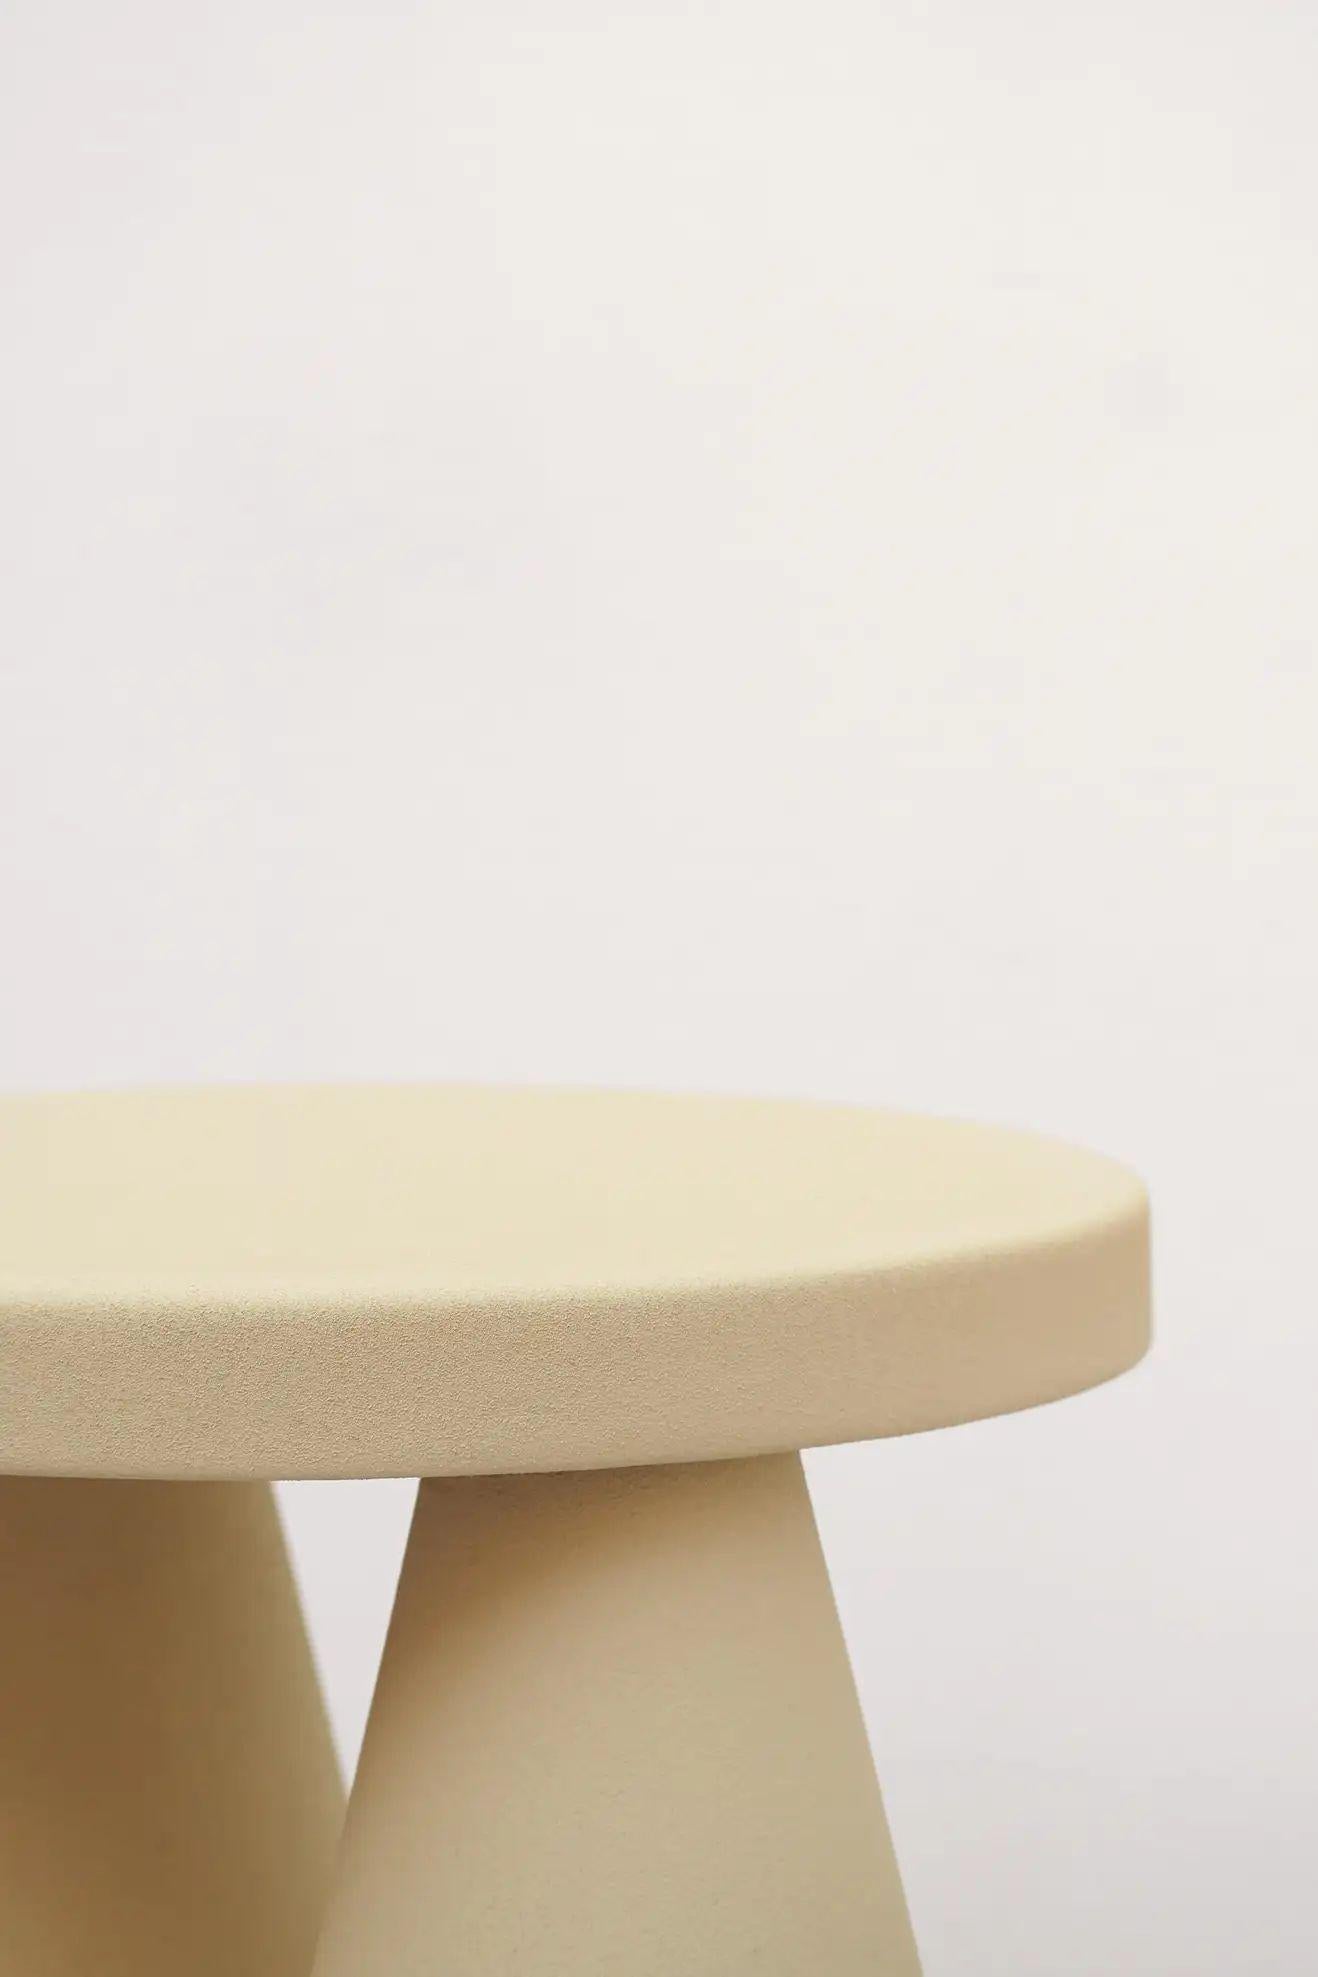 Isola Side Table by Cara Davide 11